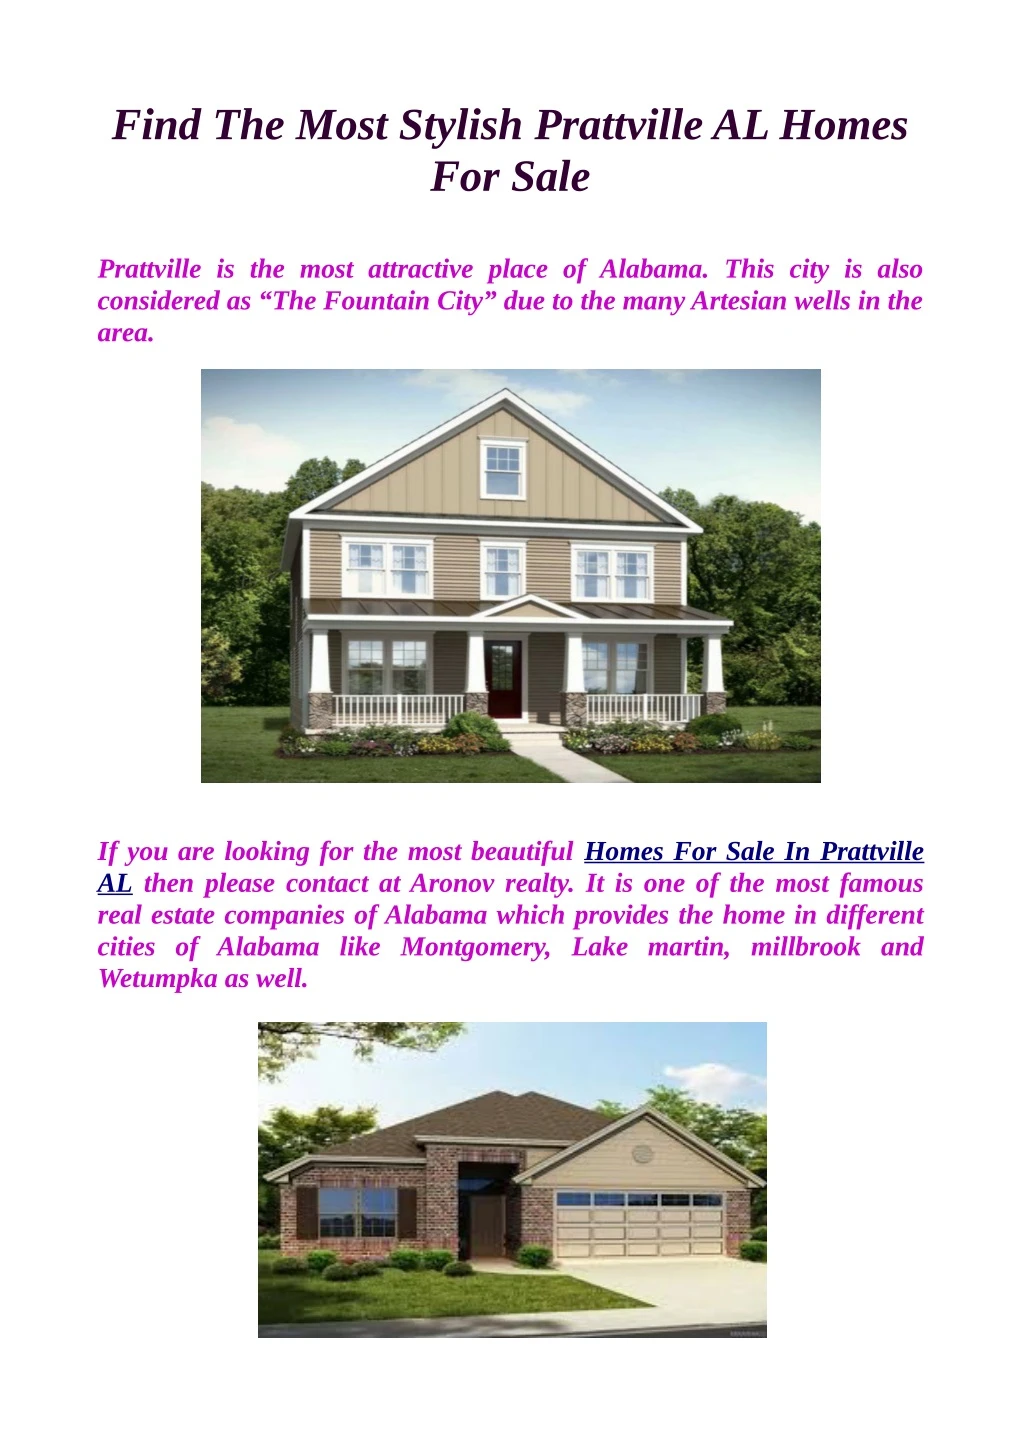 find the most stylish prattville al homes for sale